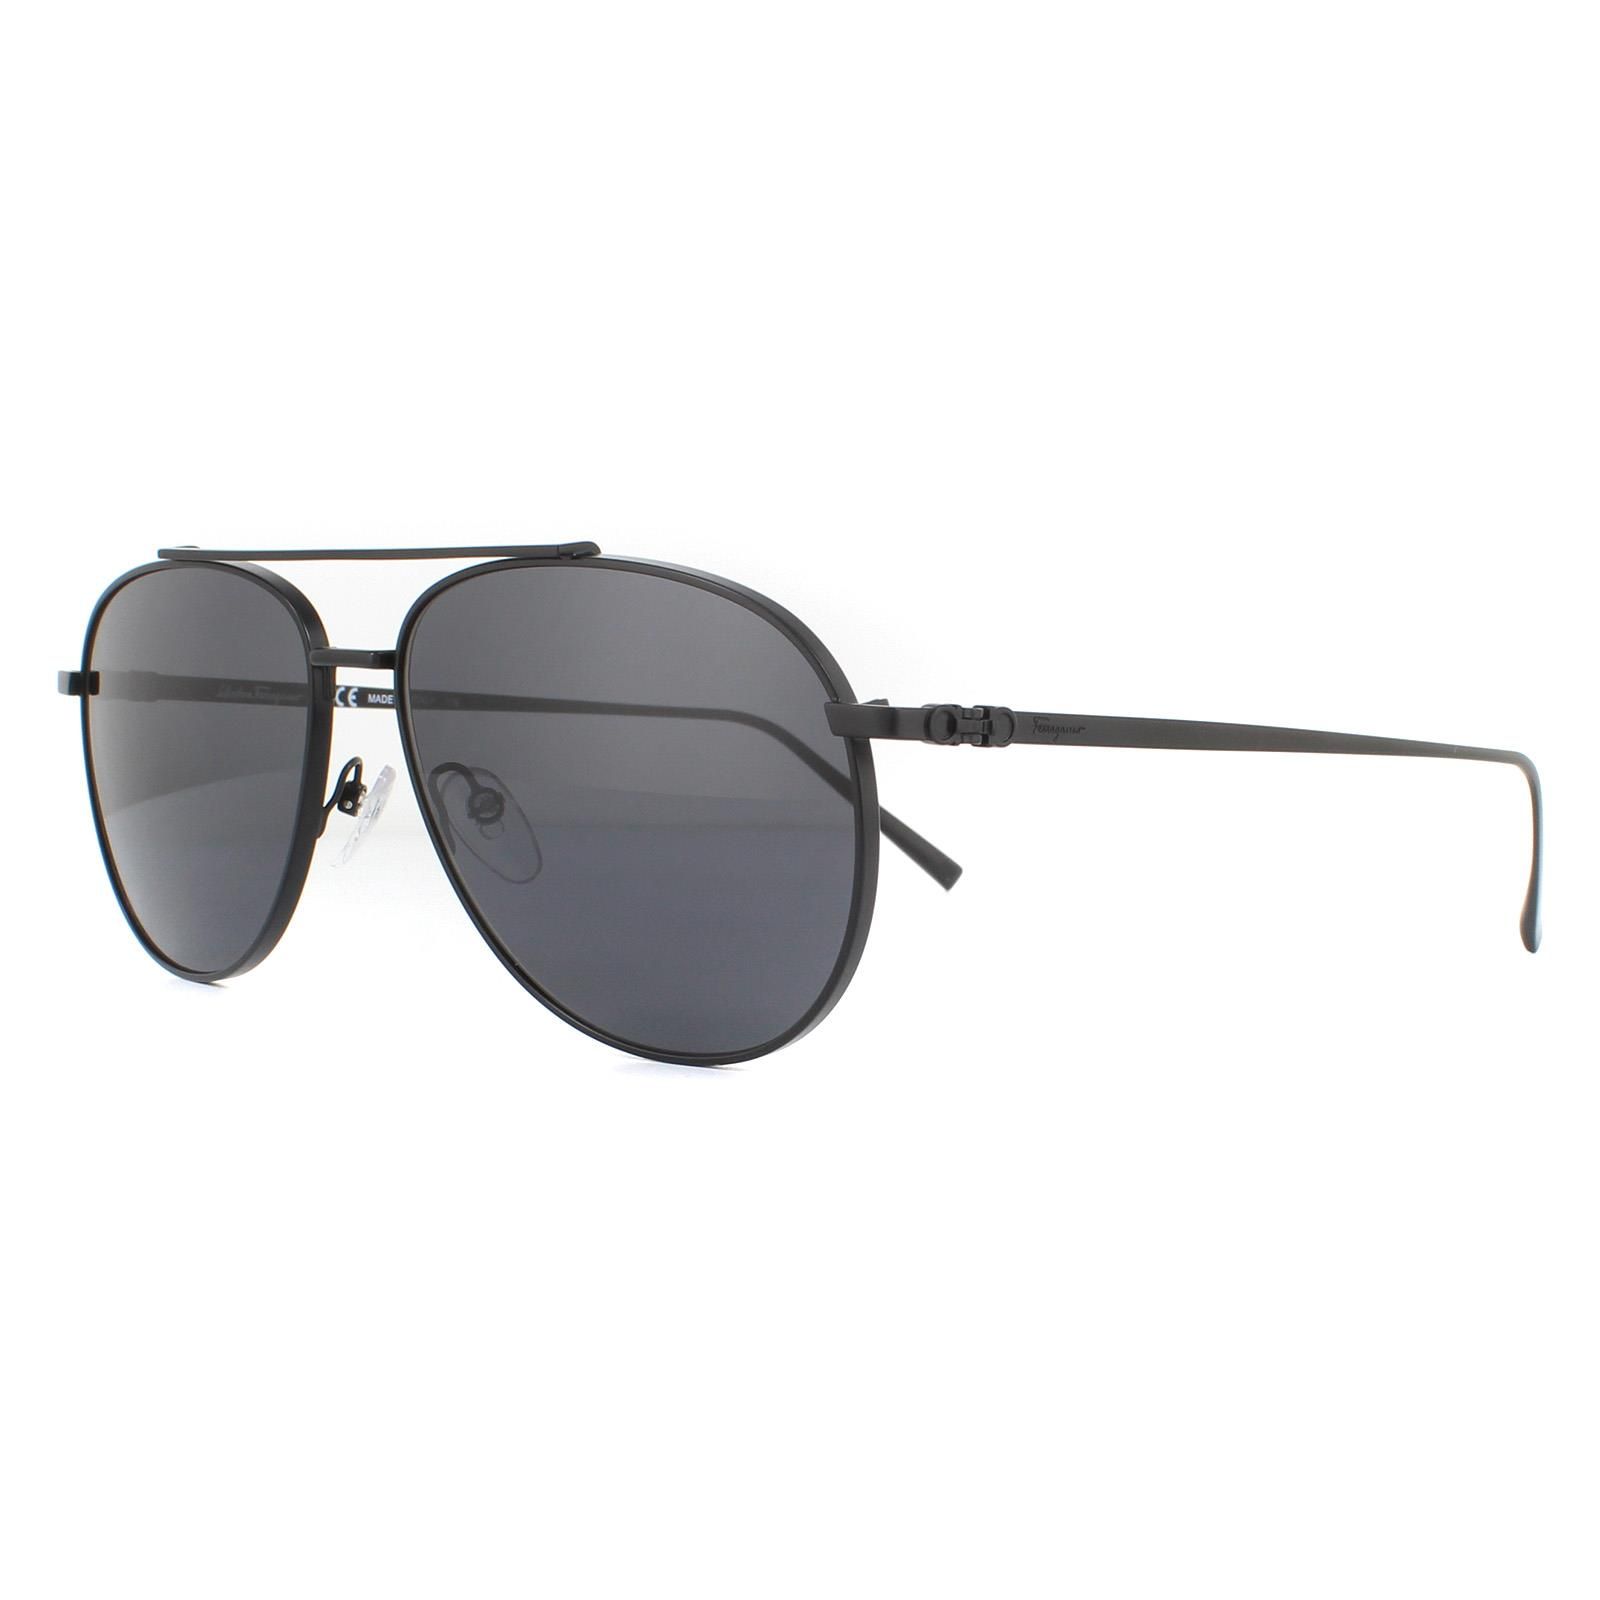 Salvatore Ferragamo Sunglasses SF201S 002 Matte Black Grey are an aviator design crafted from super lightweight metal with ultra thin temples engraved with the Ferragamo logo.